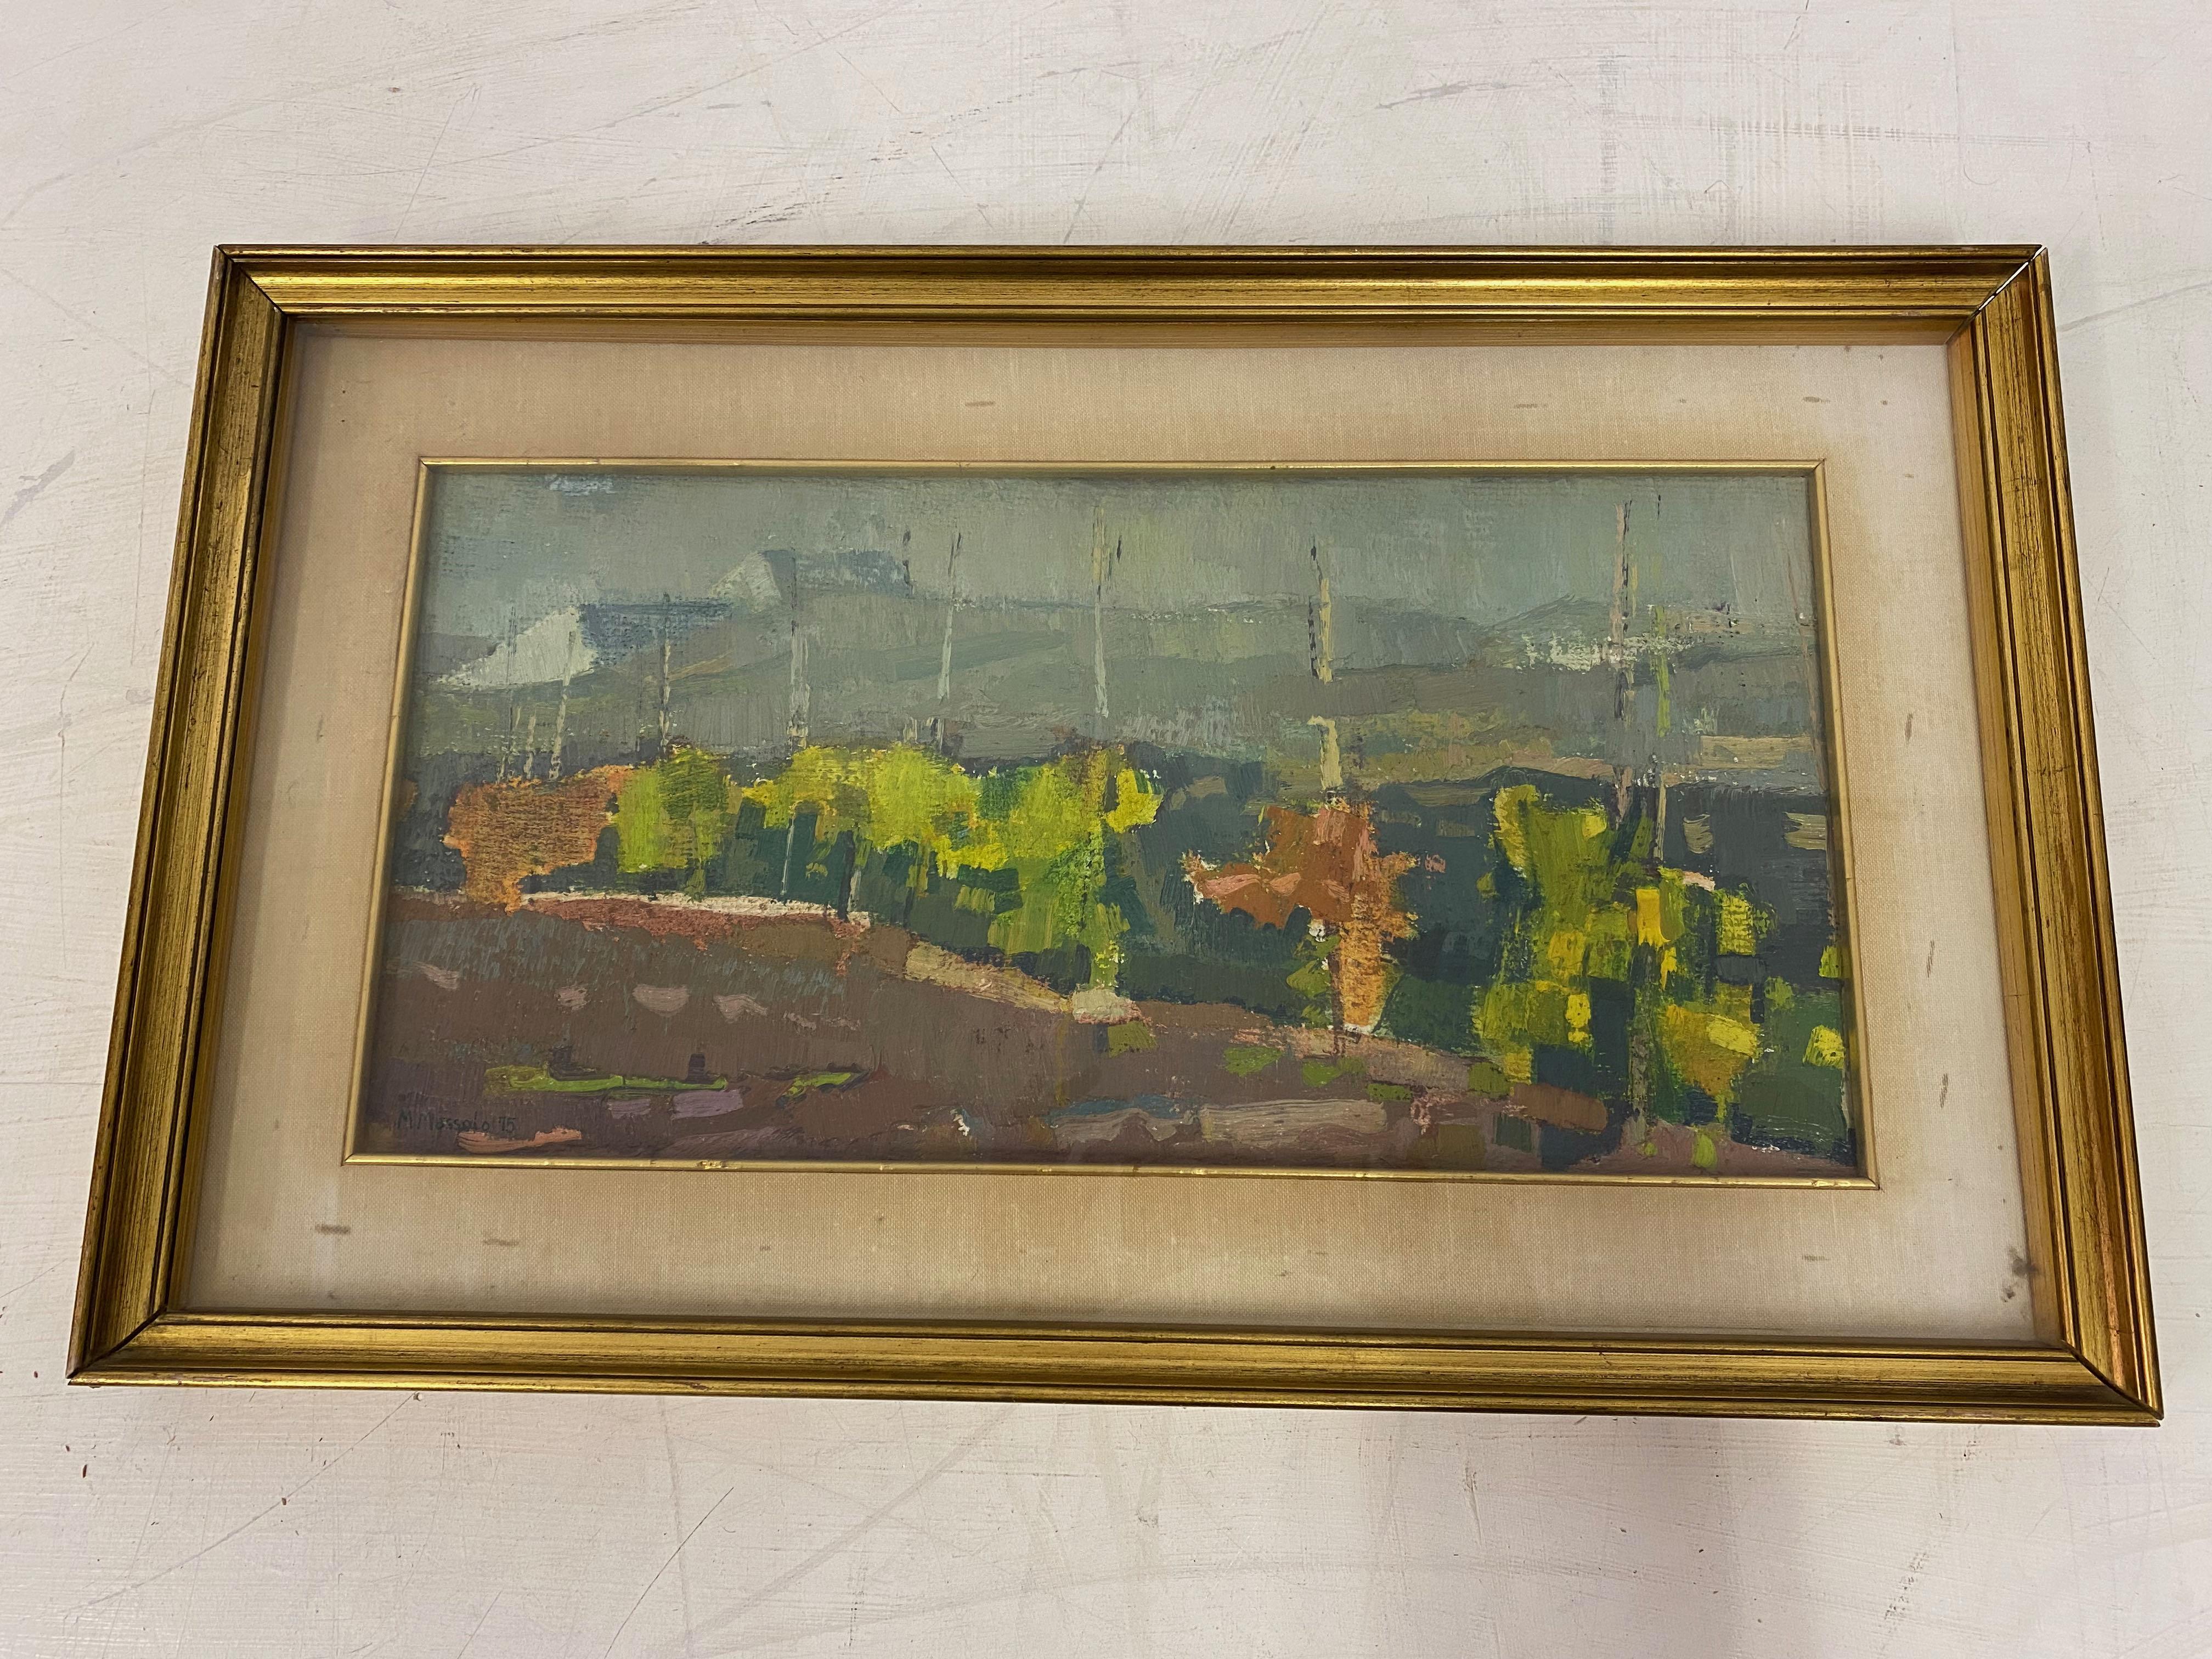 1970s Italian Landscape Painting In Good Condition For Sale In London, London